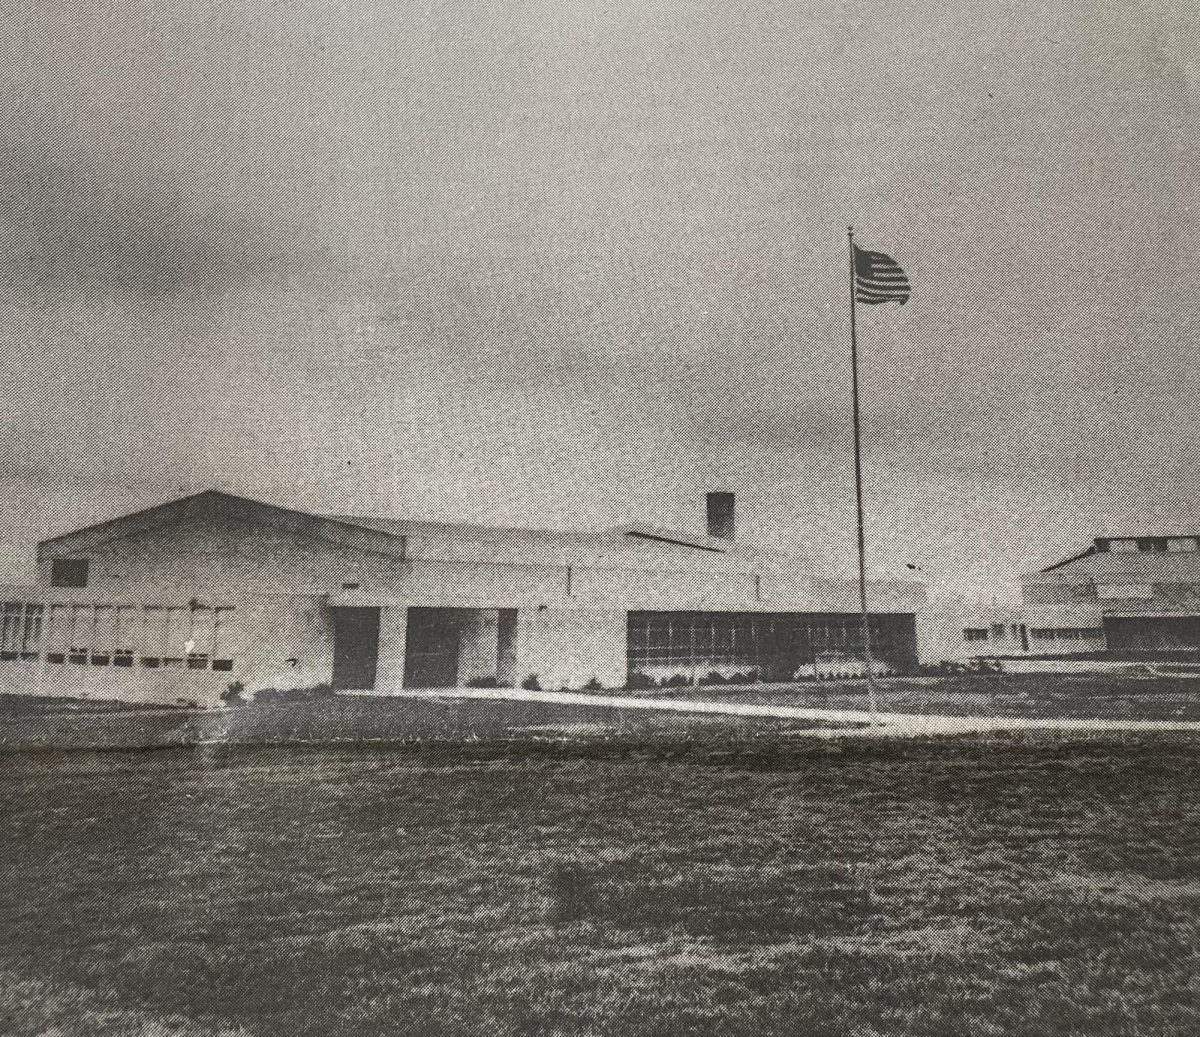 The original school plant looked considerably different than the students see now as they approach the front entrance. Remodeling done in 1984 added space and changed the front to the impressive columned structure it is today. Caption by unknown staffer